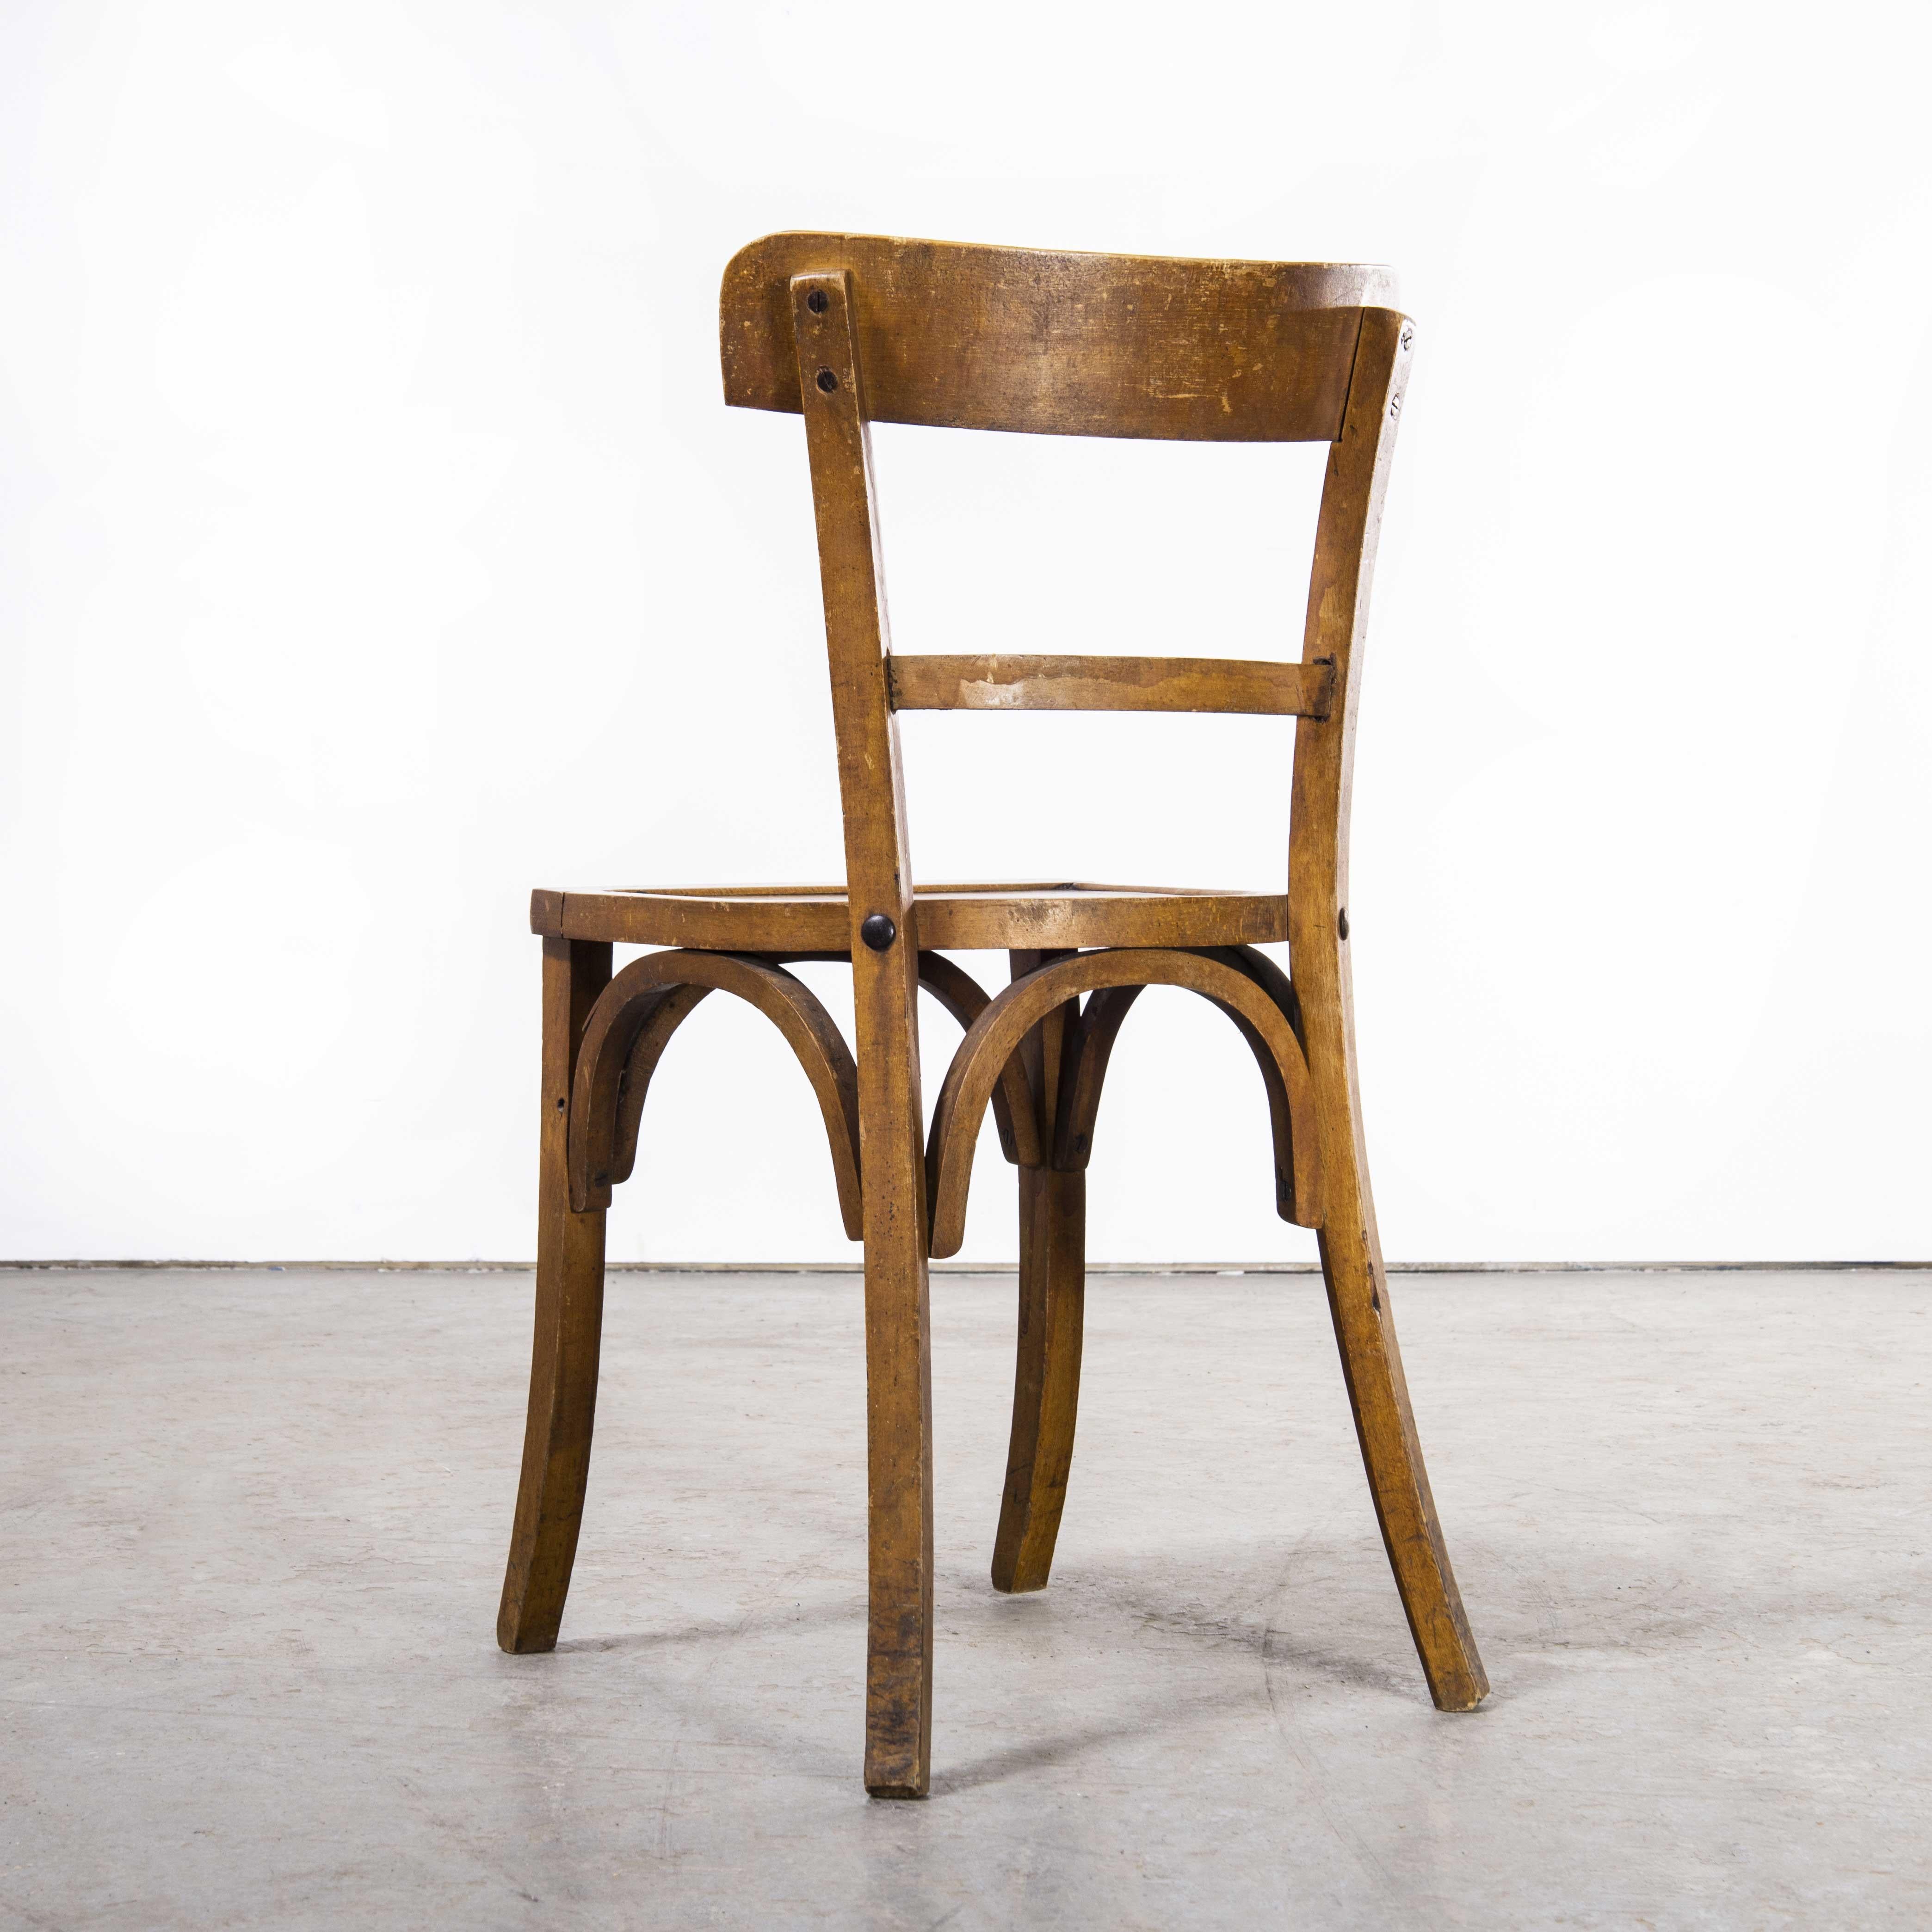 1950’s Luterma Bistro Bentwood dining chair – harlequin set of seven
1950’s Luterma Bistro Bentwood dining chair – harlequin set of seven. The process of steam bending beech to create elegant chairs was discovered and developed by Thonet, but when